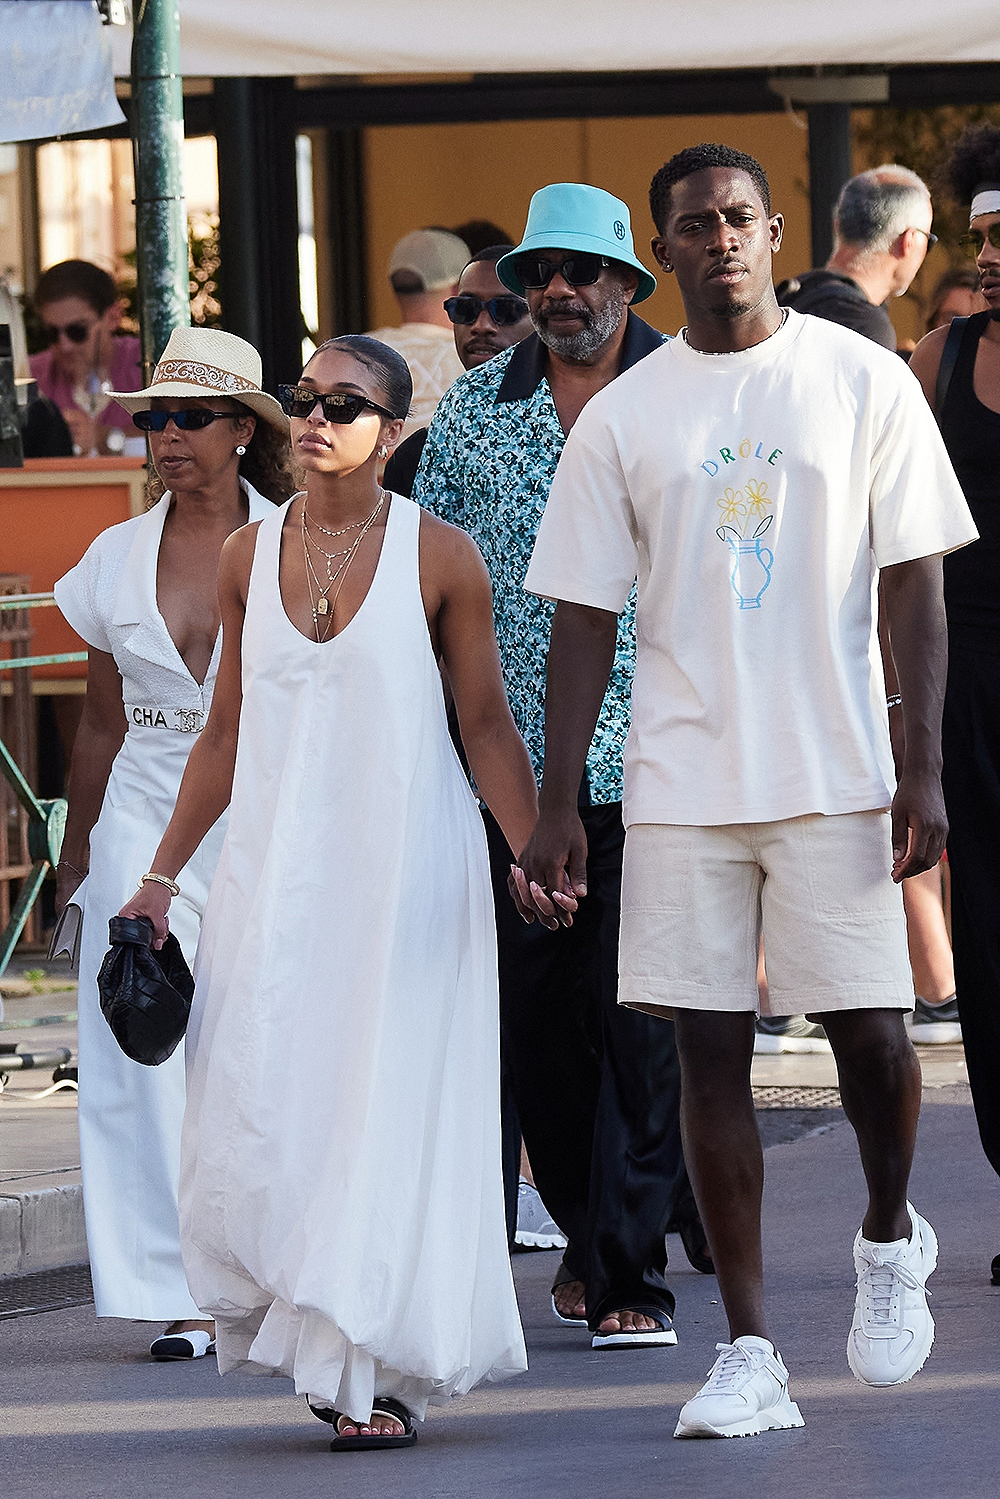 Saint-Tropez, FRANCE - Damson Idris, accompanied by his girlfriend Lori Harvey, joined by his mother Marjorie Bridges and brothers Wynton and Broderick Harvey Jr., enjoy a leisurely stroll through the charming streets of St. Tropez Pictured: Damson Idris, Lori Harvey, Marjorie Bridges, Steve Harvey +44 208 344 2007 / uksales@backgrid.com *UK Clients - Images containing children, please rasterize the face before posting*